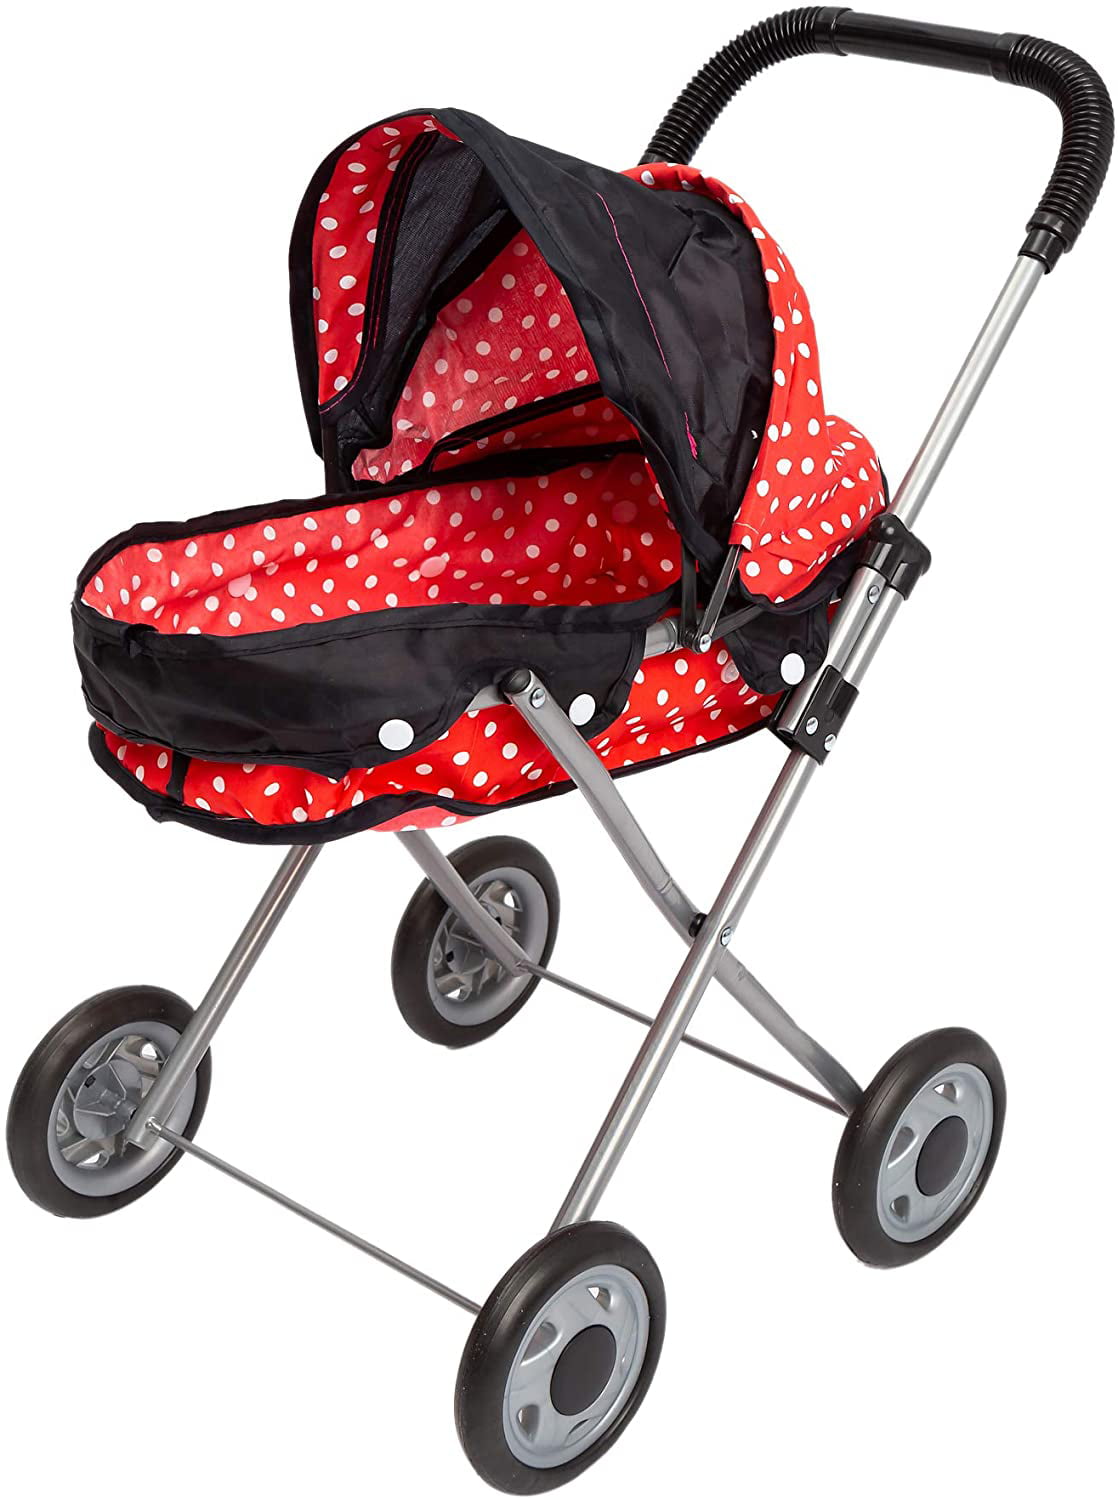 Kinderplay 2 in 1 Dolls Pram/Pushchair Age 3 Black Fabric with Pink Dots